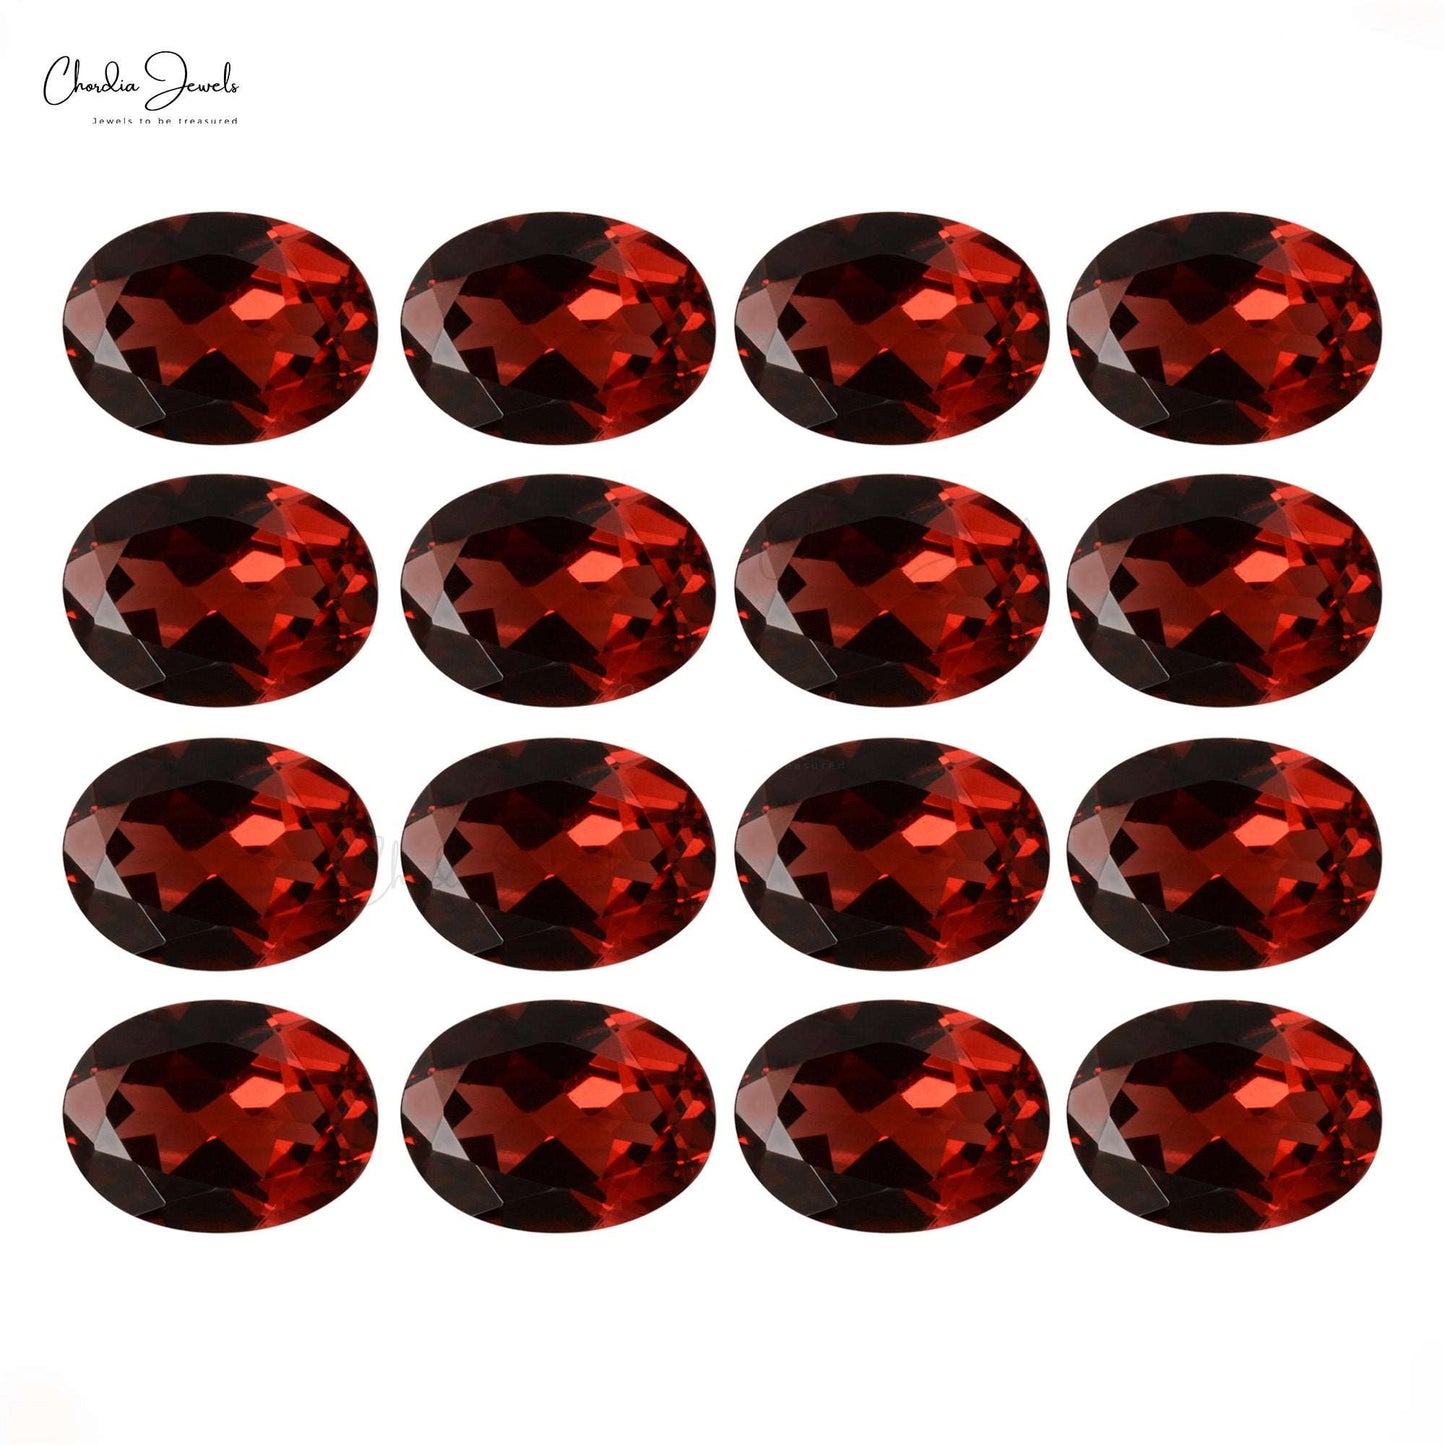 100% Natural AAA Quality 5x3mm Oval Cut Loose Garnet in Wholesale Price, 1 Piece